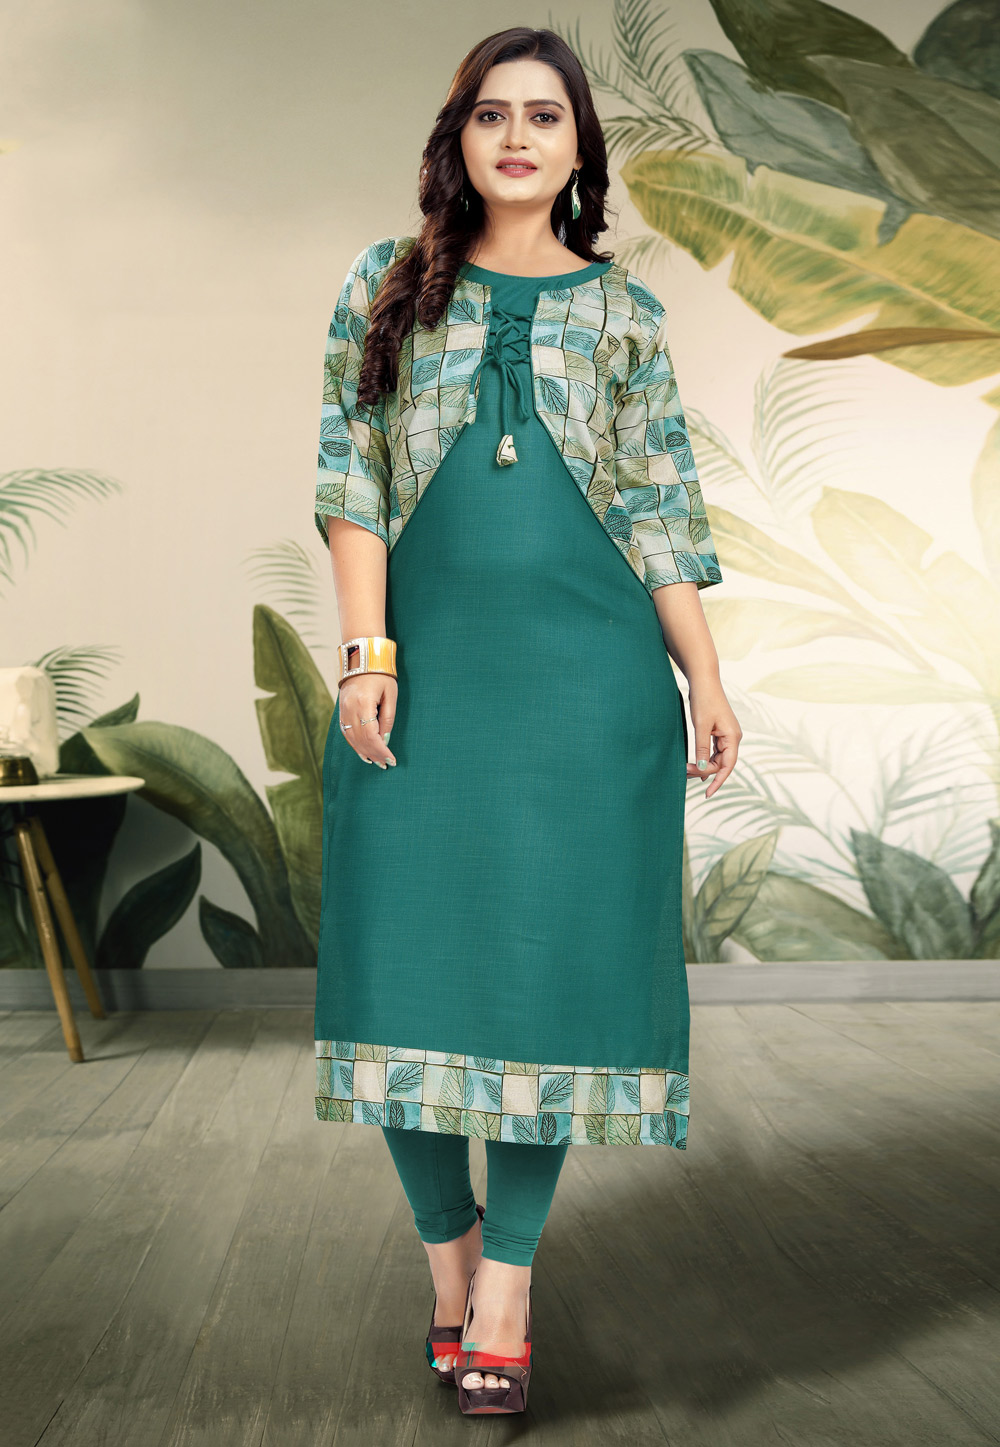 702112062021 Teal Cotton Kurti With Attached Jacket